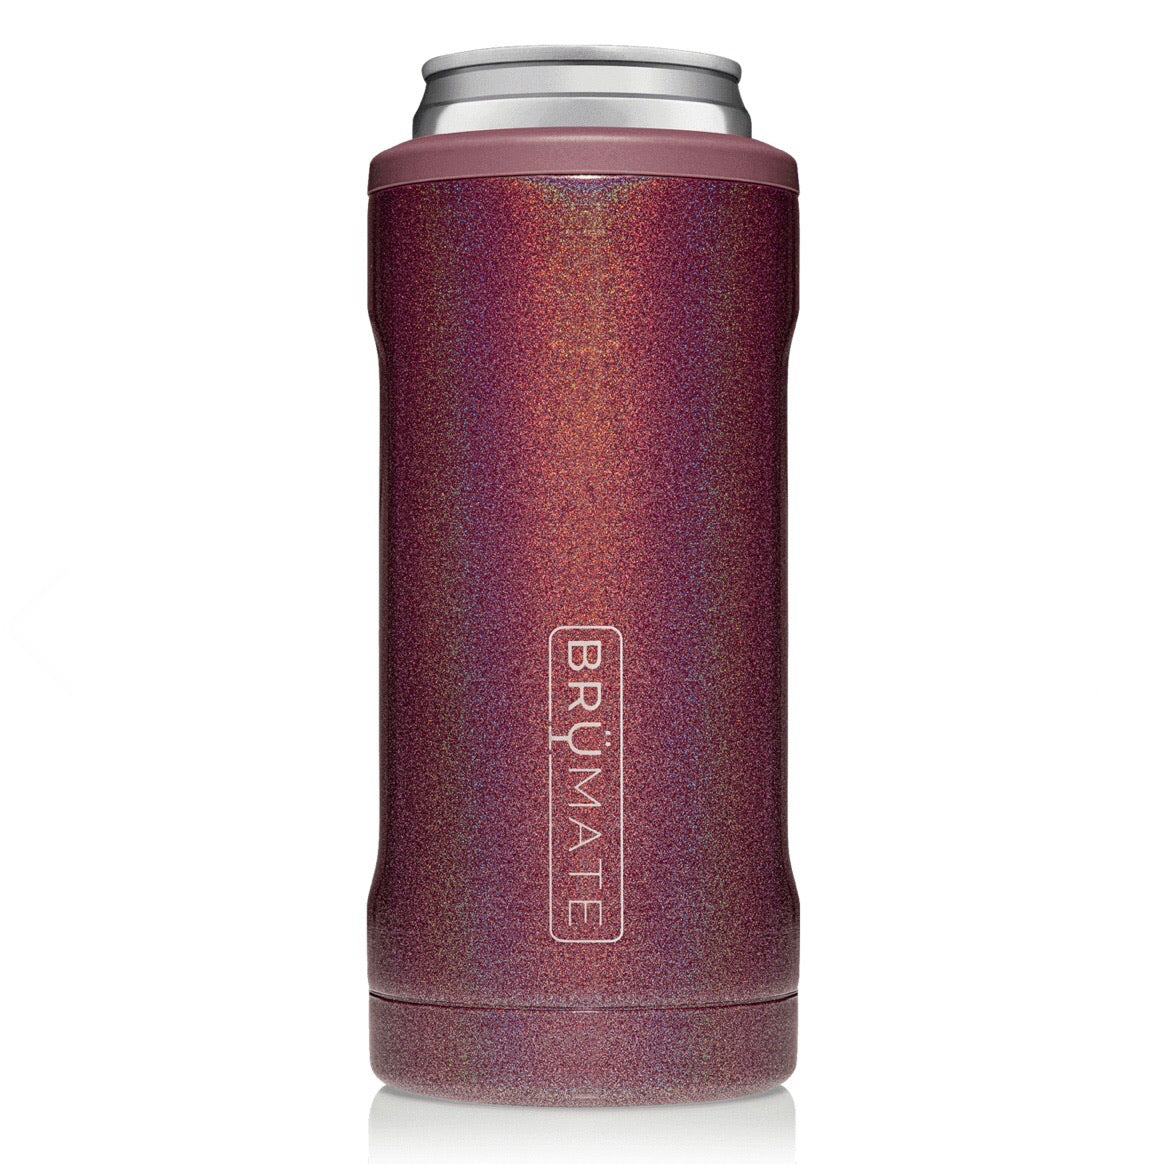 slim cans leak-proof drinkware hot to cold insulated drinkware tumbler like yeti brumate spillproof glitter